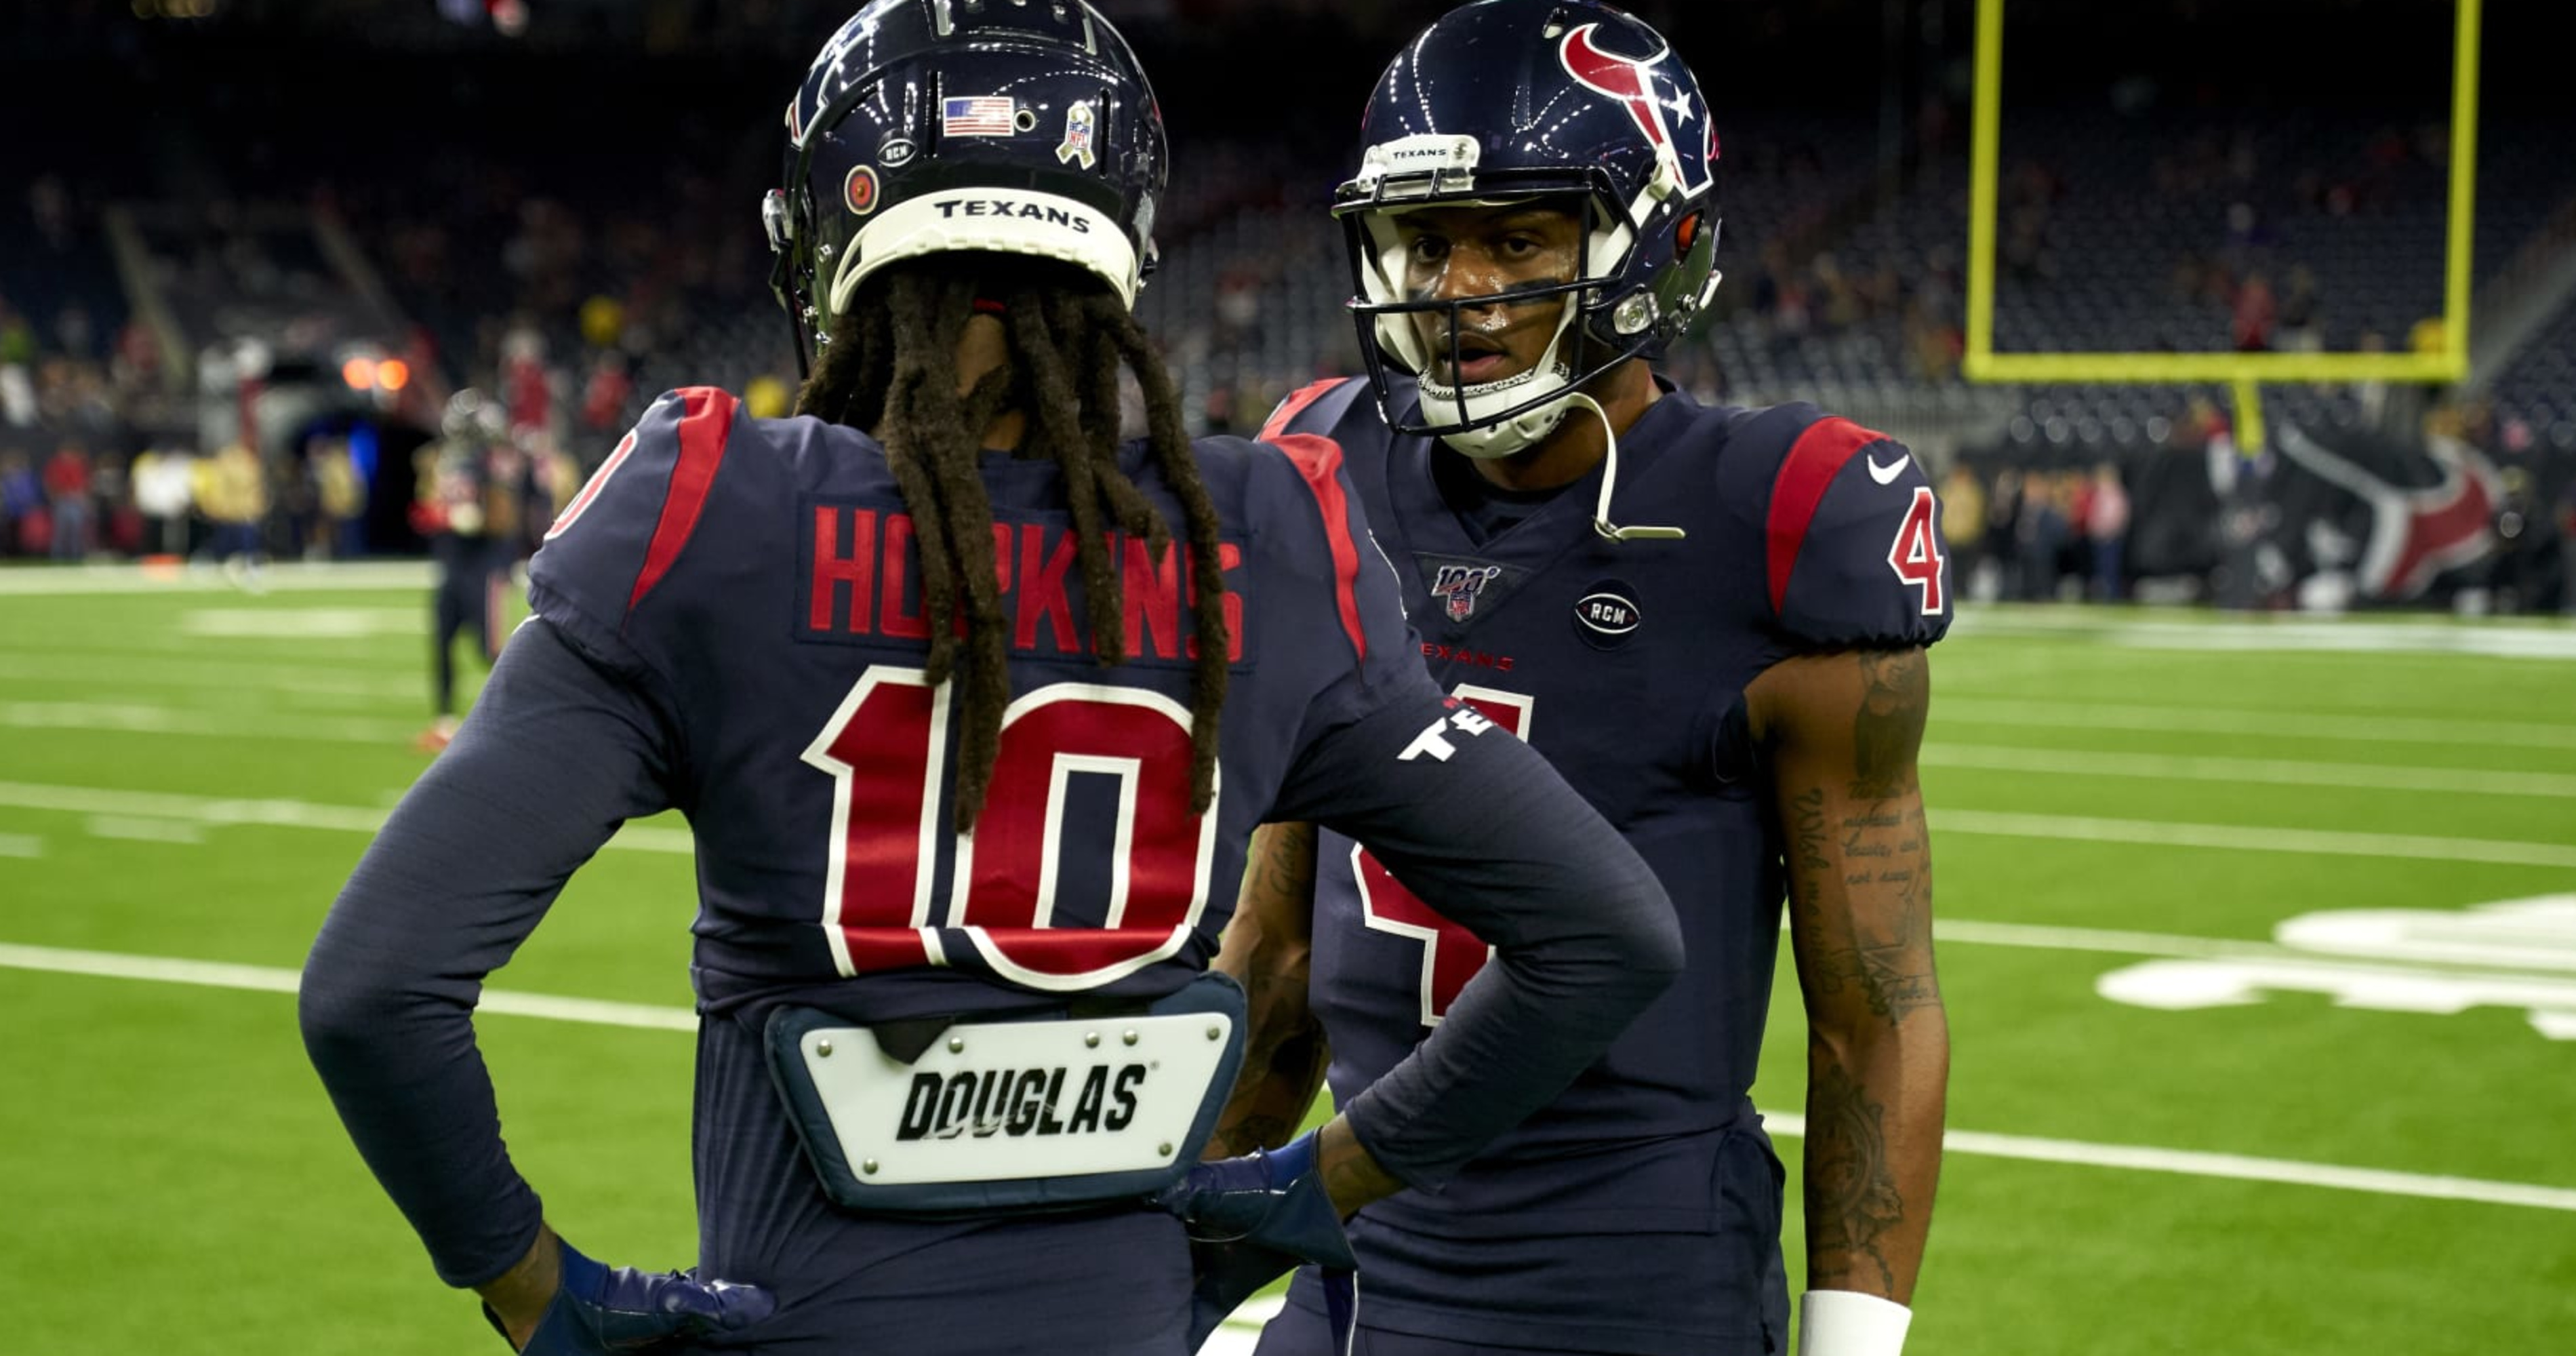 Free agent WR DeAndre Hopkins signs with Titans over Patriots, Browns